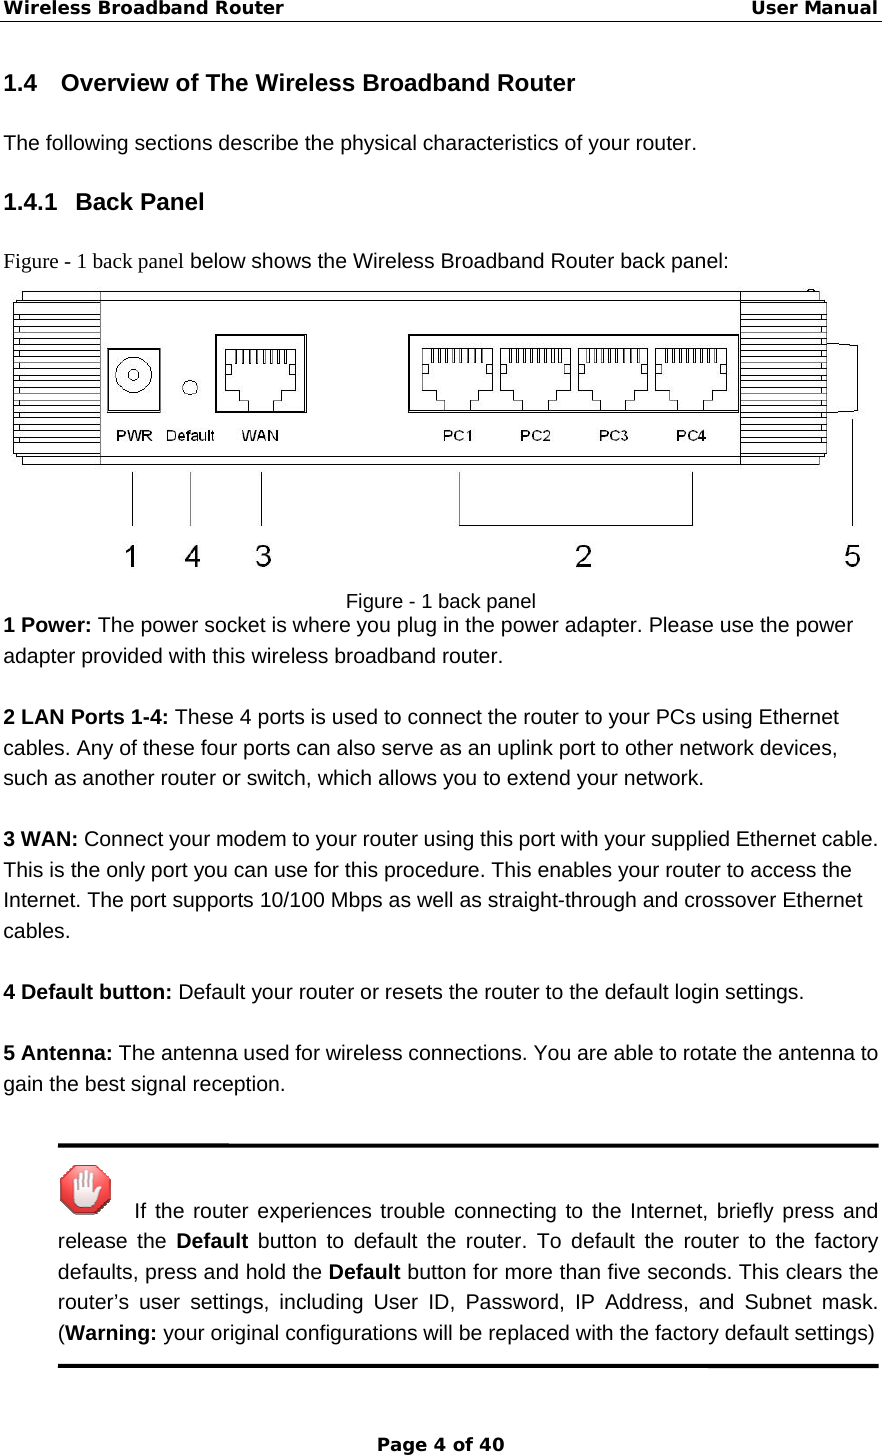 Wireless Broadband Router                                                   User Manual Page 4 of 40 1.4  Overview of The Wireless Broadband Router The following sections describe the physical characteristics of your router. 1.4.1 Back Panel Figure - 1 back panel below shows the Wireless Broadband Router back panel:  Figure - 1 back panel 1 Power: The power socket is where you plug in the power adapter. Please use the power adapter provided with this wireless broadband router.  2 LAN Ports 1-4: These 4 ports is used to connect the router to your PCs using Ethernet cables. Any of these four ports can also serve as an uplink port to other network devices, such as another router or switch, which allows you to extend your network.  3 WAN: Connect your modem to your router using this port with your supplied Ethernet cable. This is the only port you can use for this procedure. This enables your router to access the Internet. The port supports 10/100 Mbps as well as straight-through and crossover Ethernet cables.  4 Default button: Default your router or resets the router to the default login settings.  5 Antenna: The antenna used for wireless connections. You are able to rotate the antenna to gain the best signal reception.     If the router experiences trouble connecting to the Internet, briefly press and release the Default button to default the router. To default the router to the factory defaults, press and hold the Default button for more than five seconds. This clears the router’s user settings, including User ID, Password, IP Address, and Subnet mask. (Warning: your original configurations will be replaced with the factory default settings)   